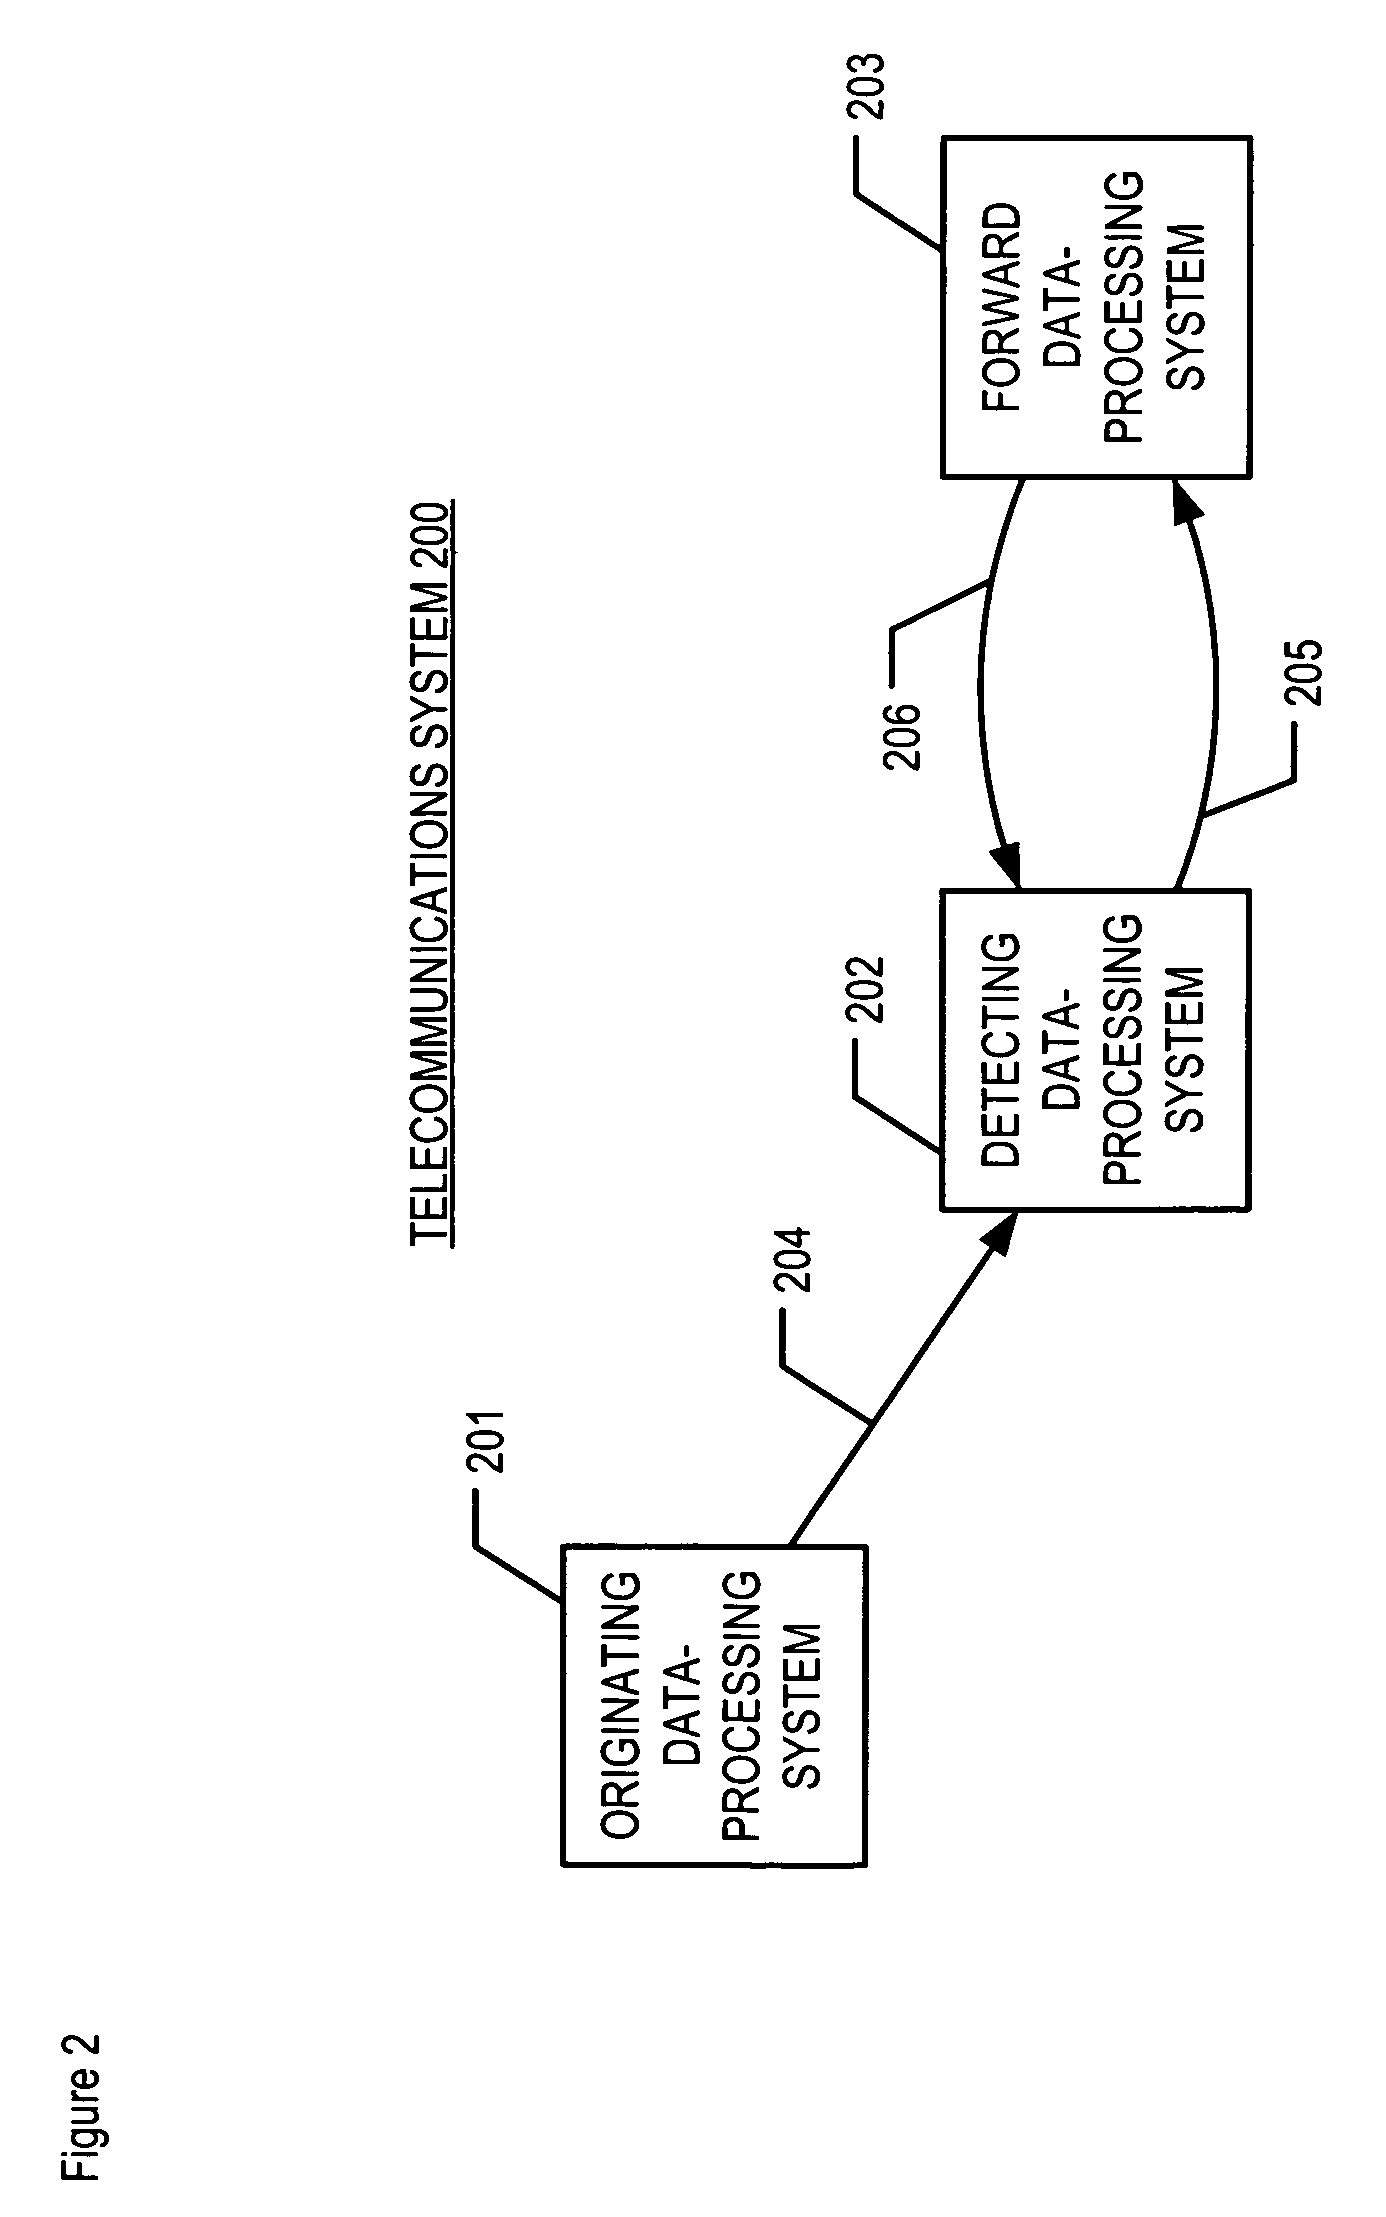 Detection of looping communication channels